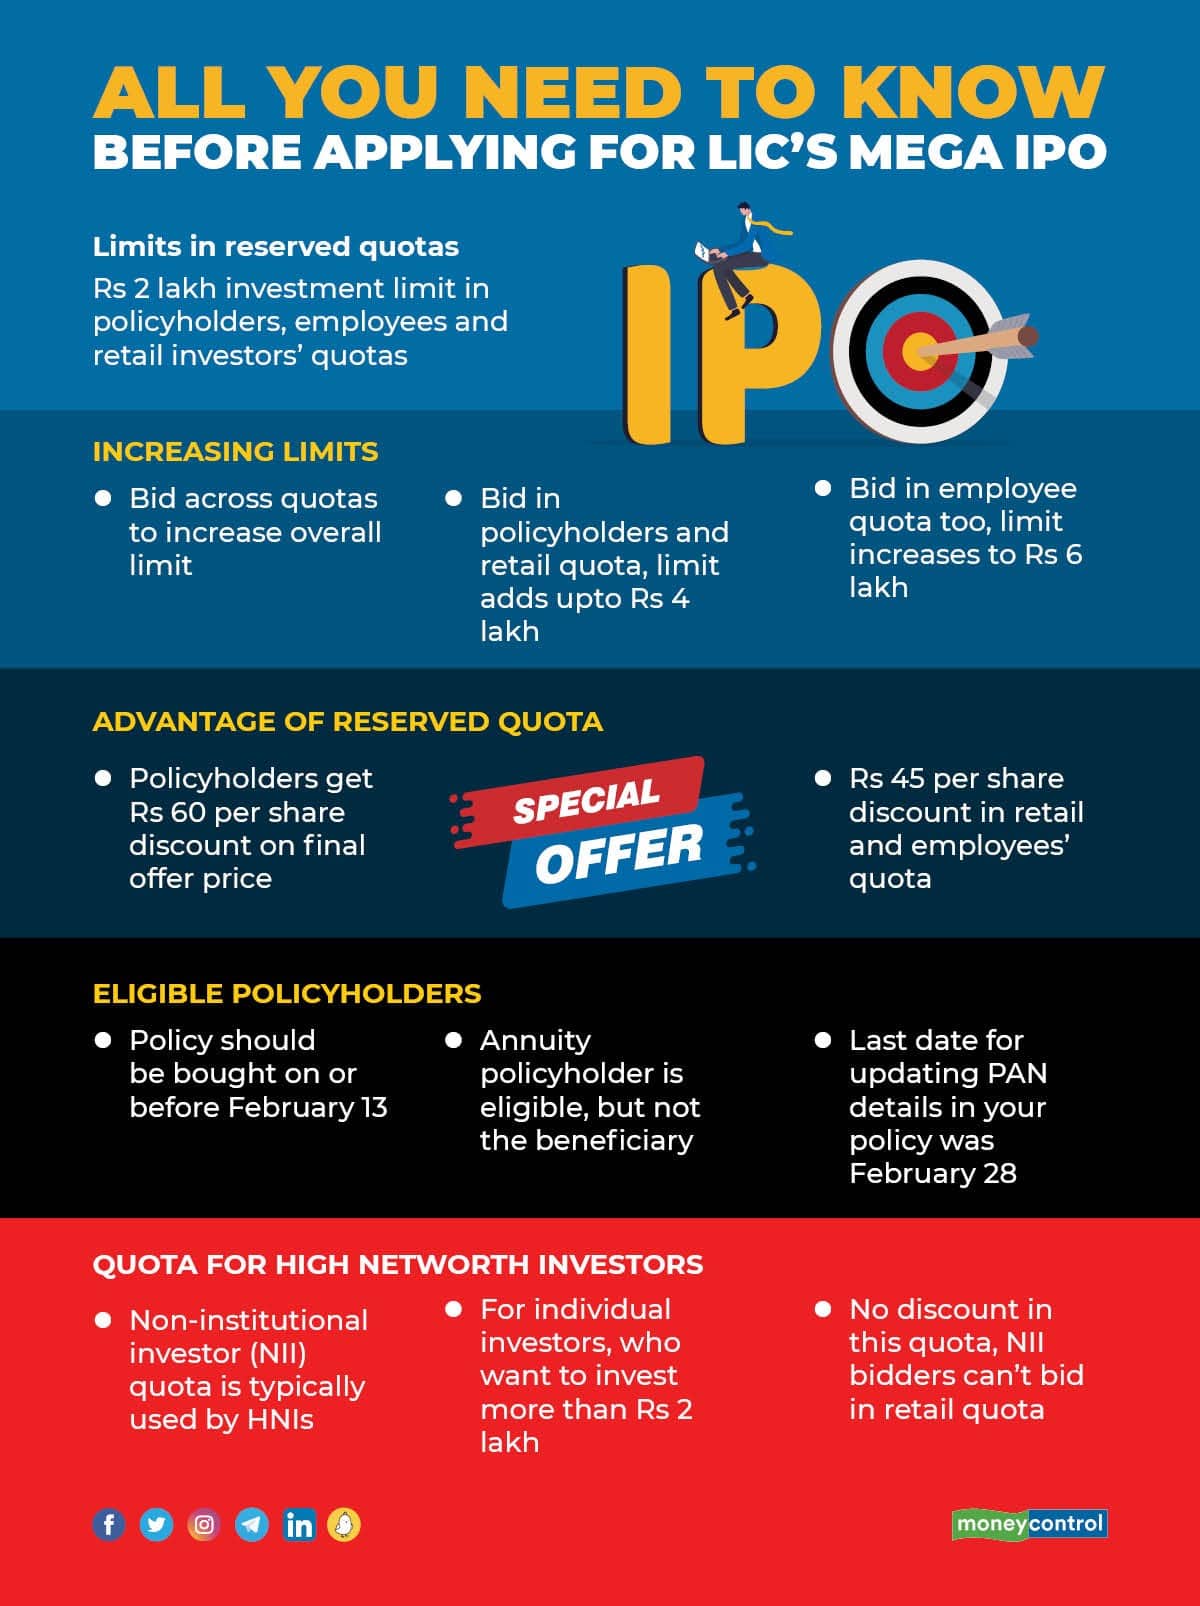 All you need to know before applying for LIC's Mega IPO (Illustration: MoneyControl)